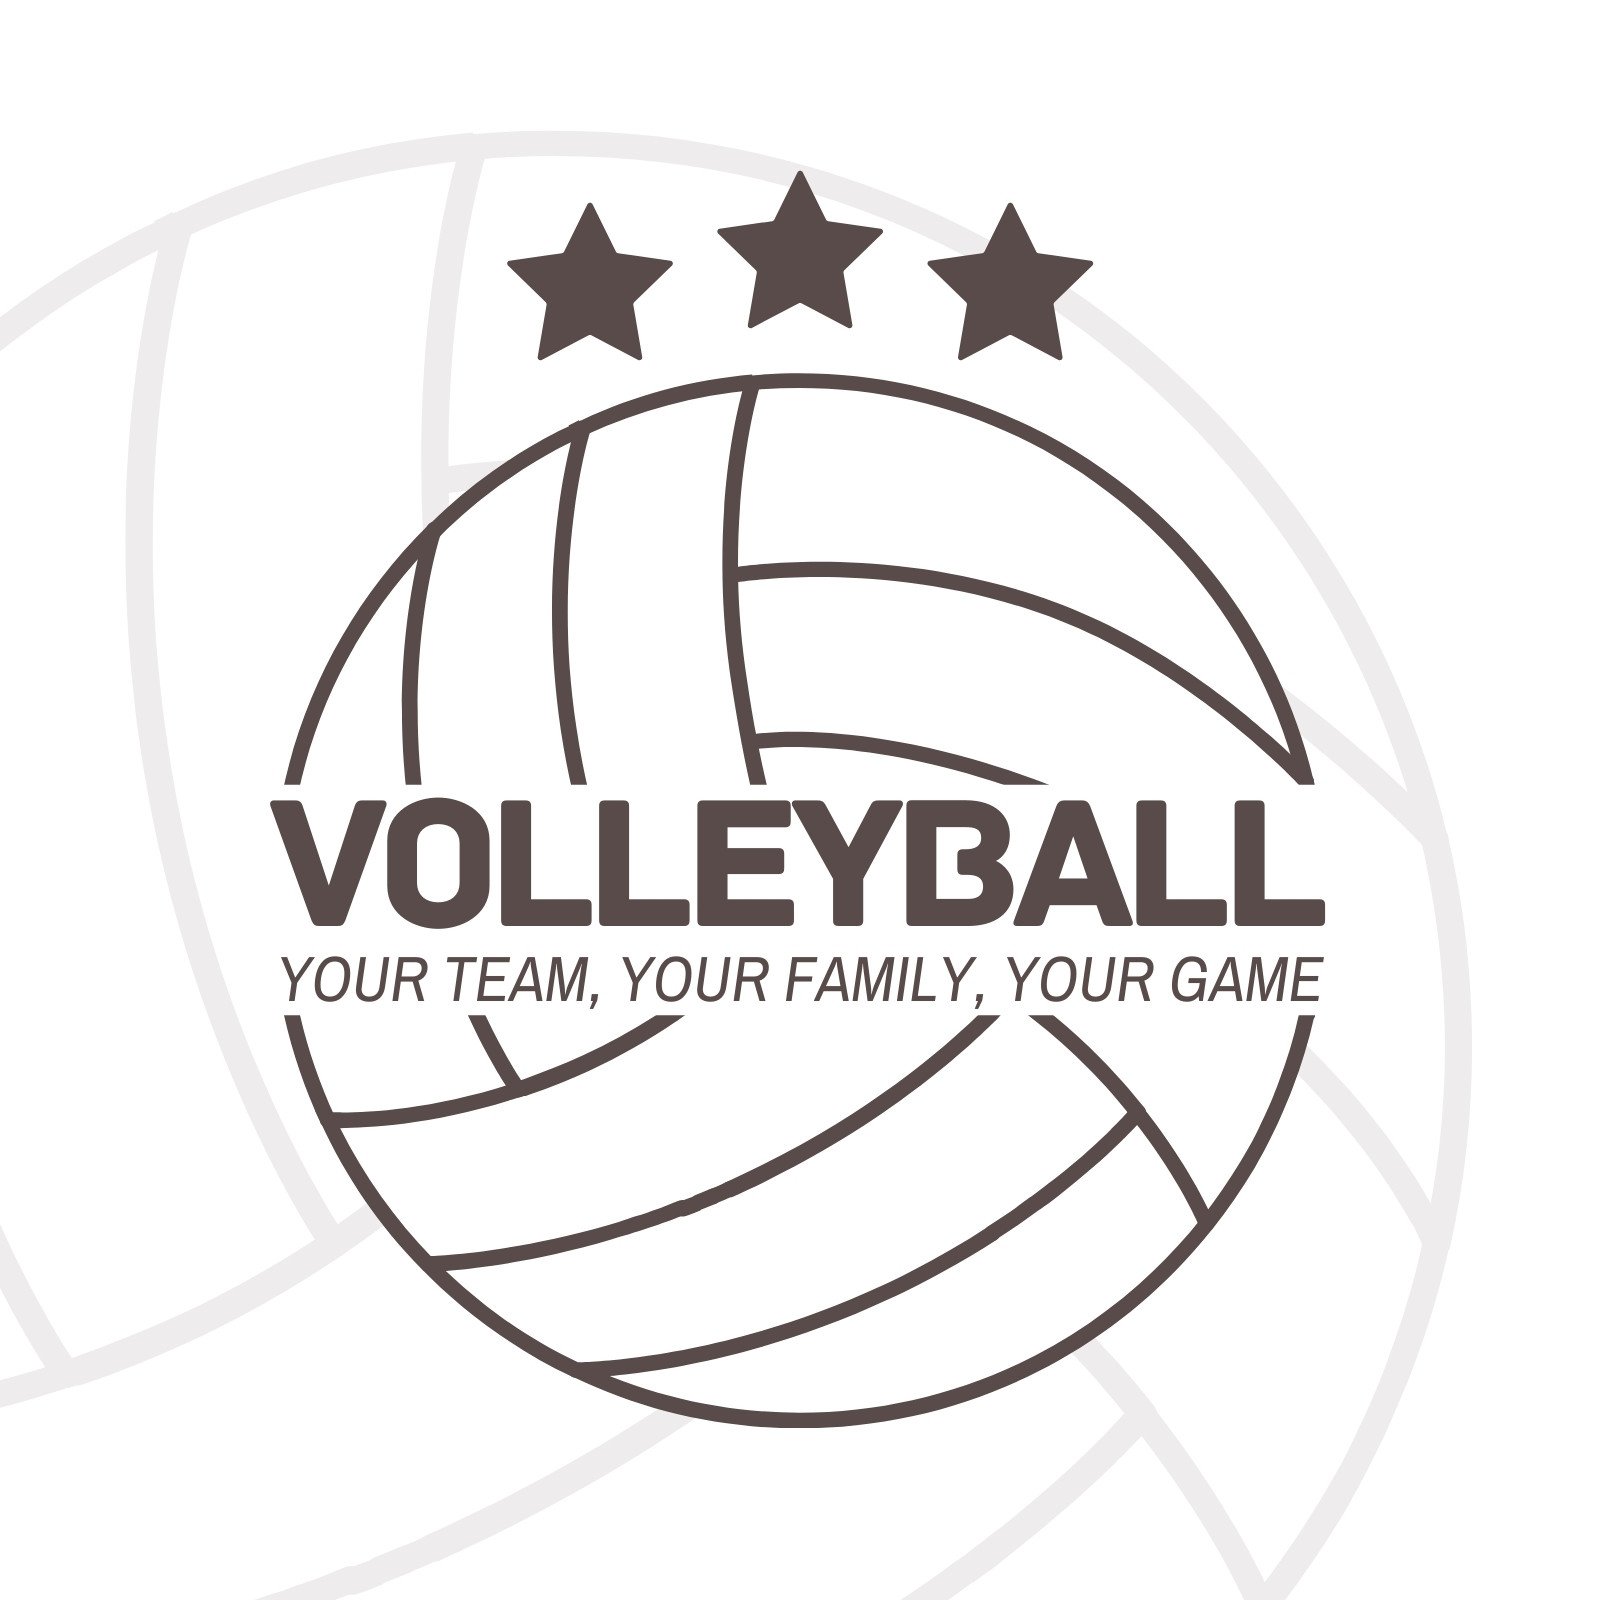 Premium Vector | Volleyball smash template | Volleyball wallpaper,  Volleyball posters, Sport illustration